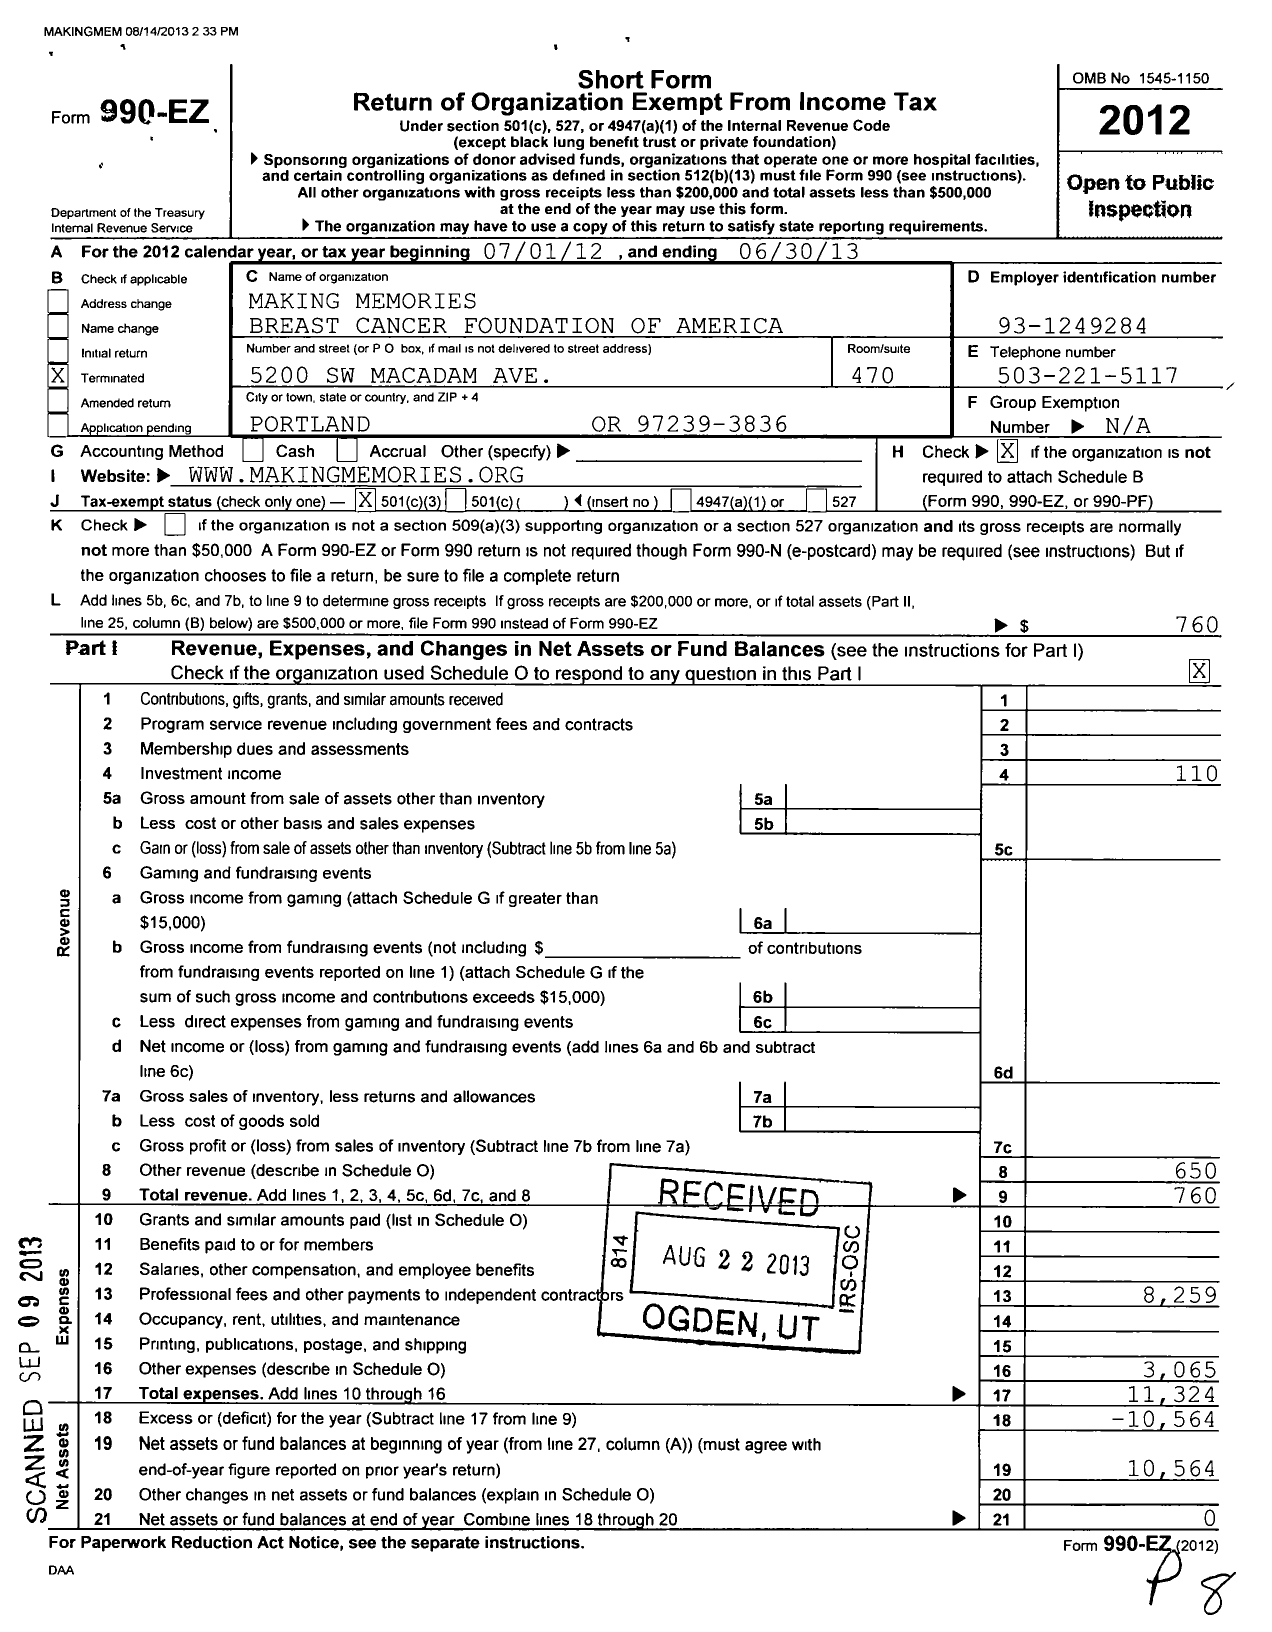 Image of first page of 2012 Form 990EZ for Making Memories Breast Cancer Foundation of America